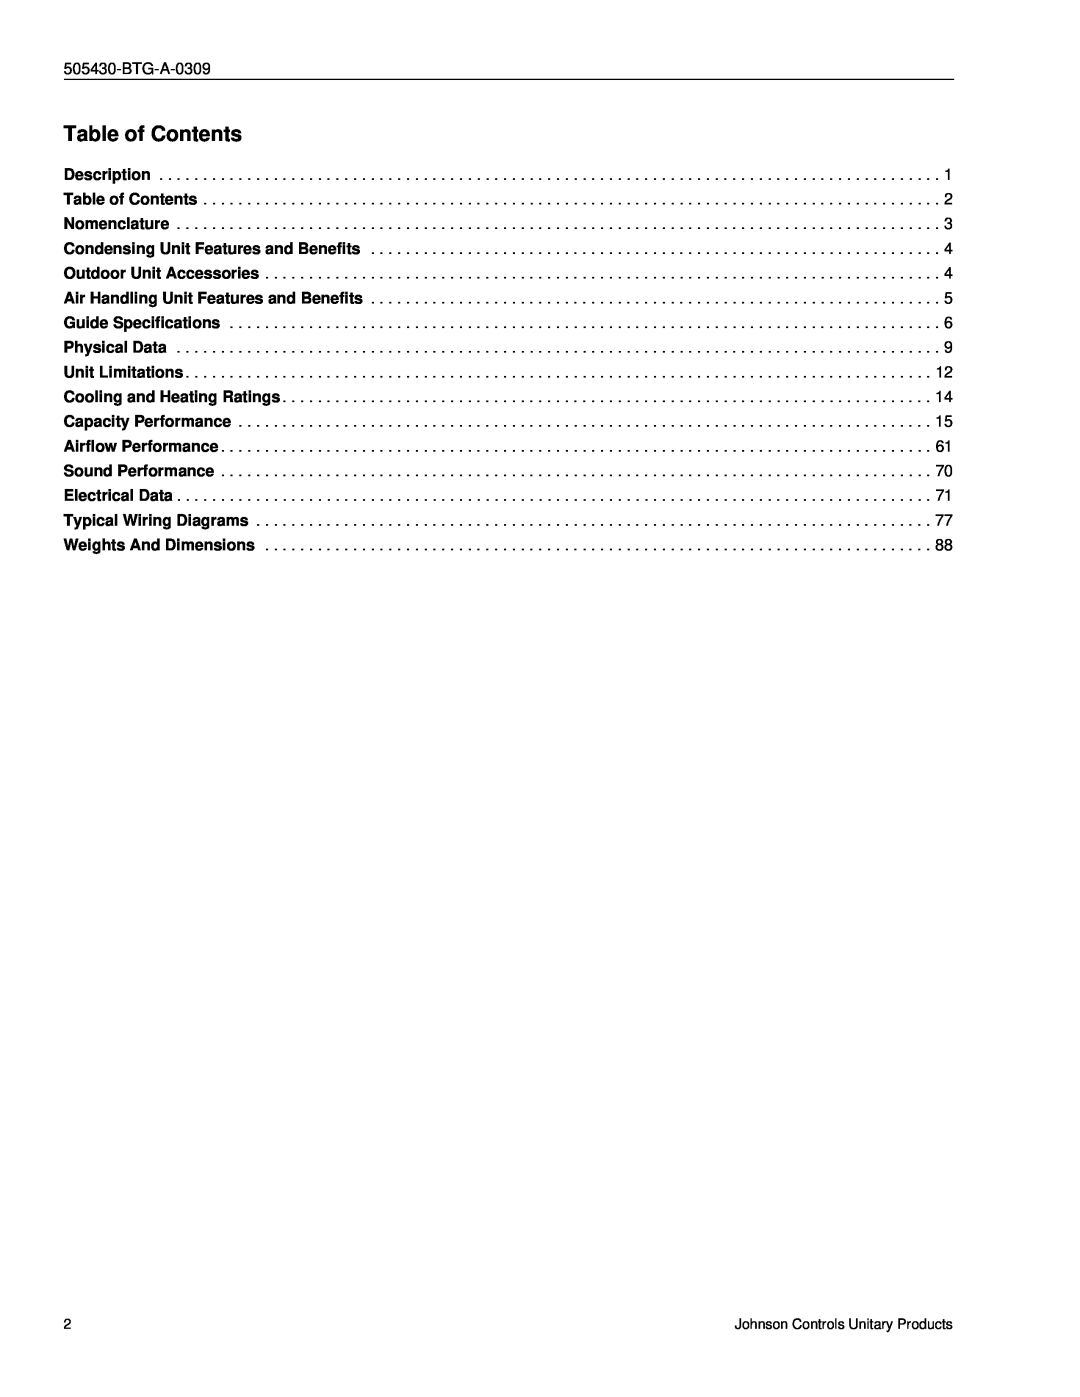 Johnson Controls R-410A manual Table of Contents 